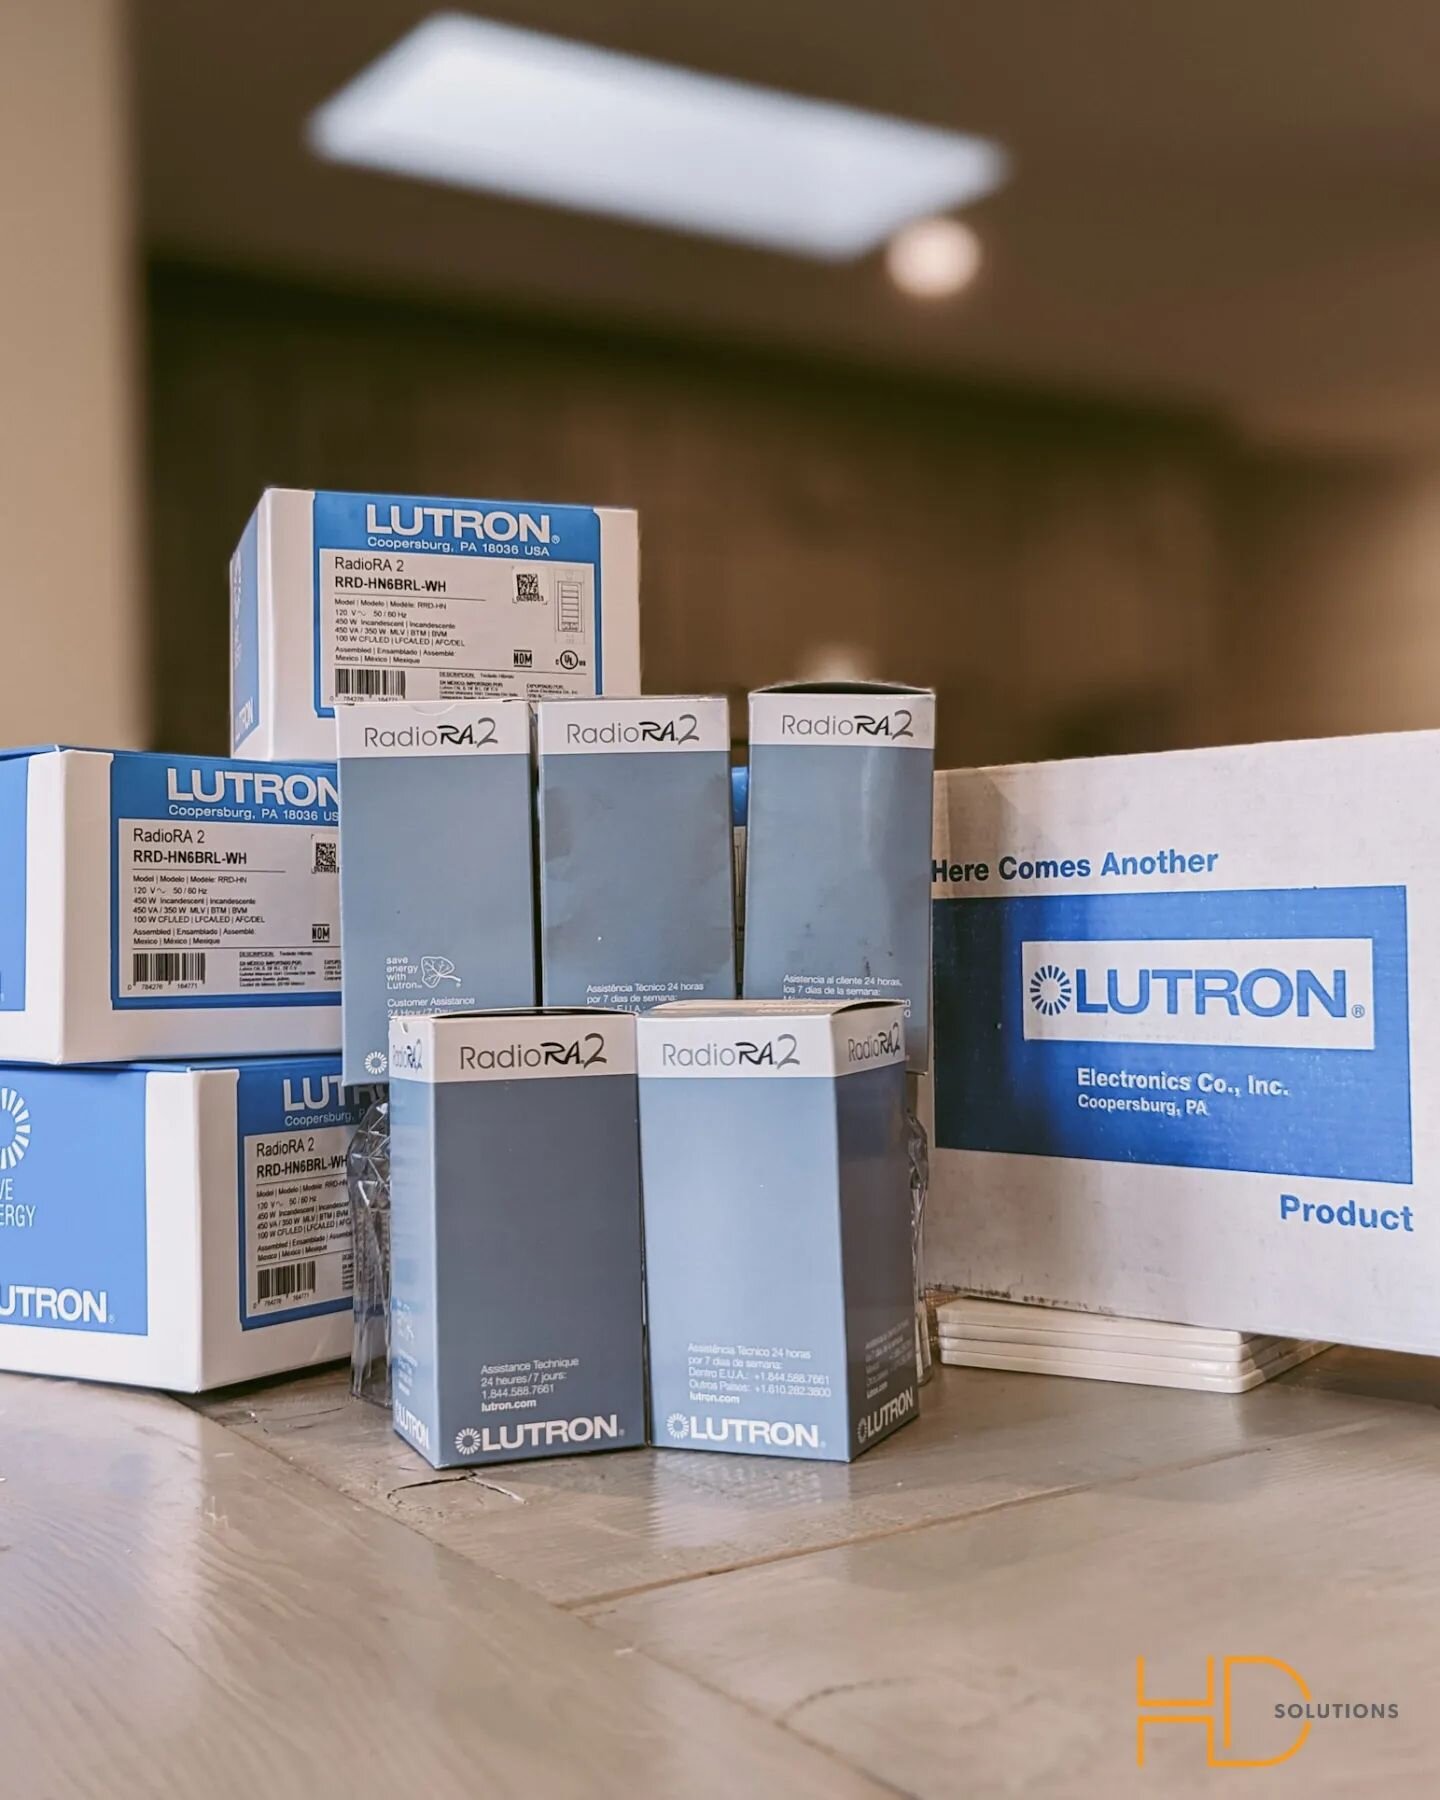 Oh the things we'll control... Ask us how Lutron can bring your lighting to the next level!

#hds #hdsolutions #electrician #contractor #lowvoltage #commercialconstruction #residentialconstruction #nodaysoff #homebuilder #customhomes #luxuryhome #hom